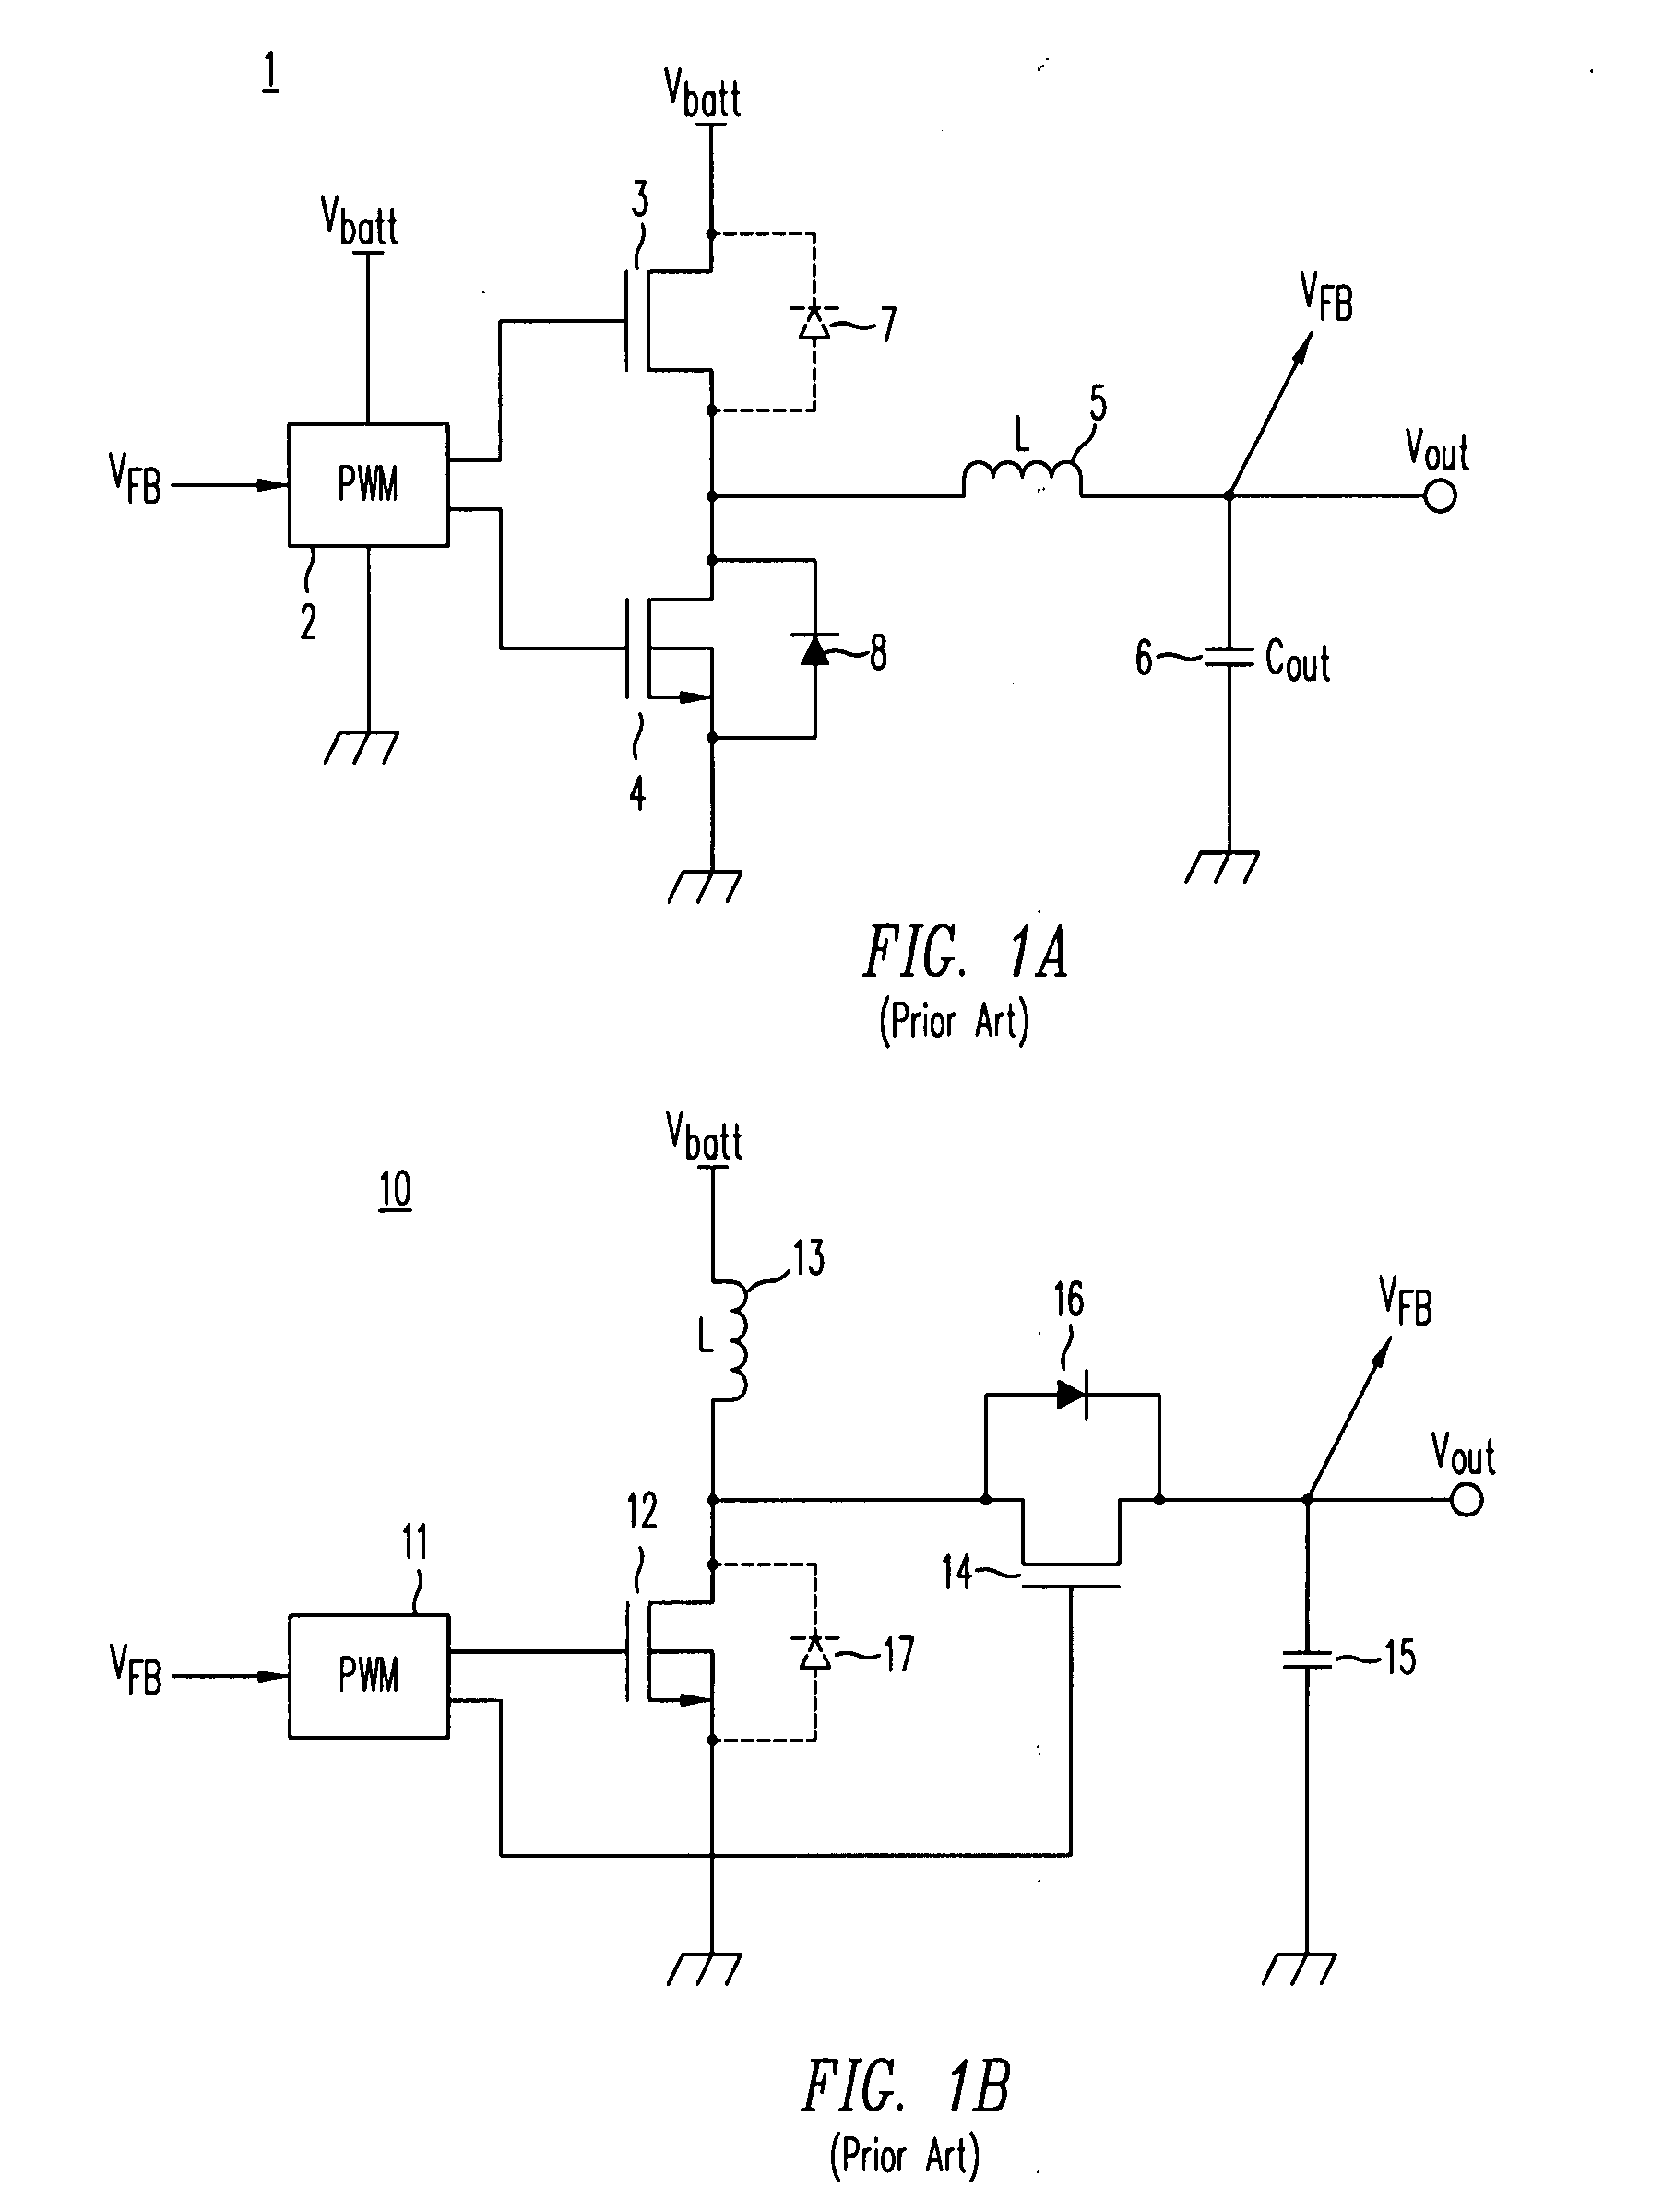 High-efficiency DC/DC voltage converter including up inductive switching pre-regulator and capacitive switching post-converter